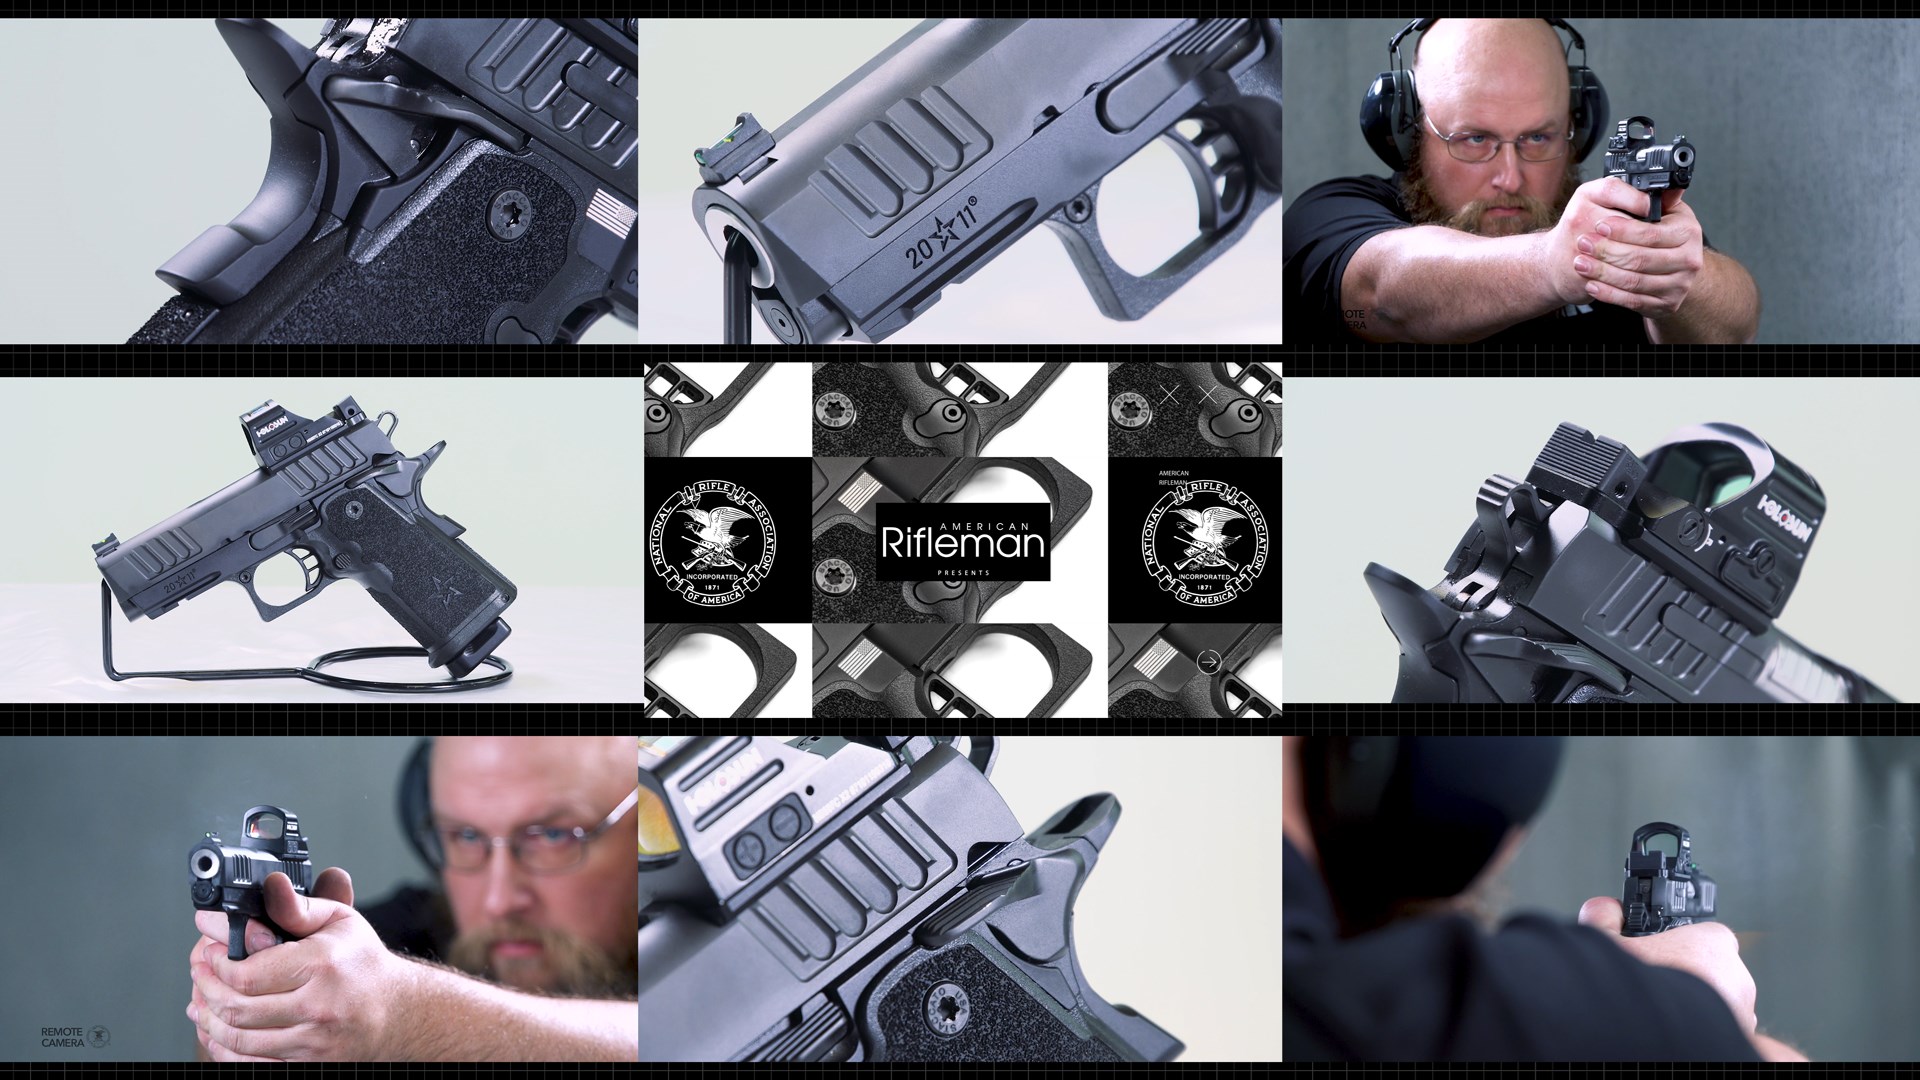 Staccato CS handgun pistol nine image mosaic man shooting gun left right detail images semi-automatic 9 mm compact hybrid m1911 double stack